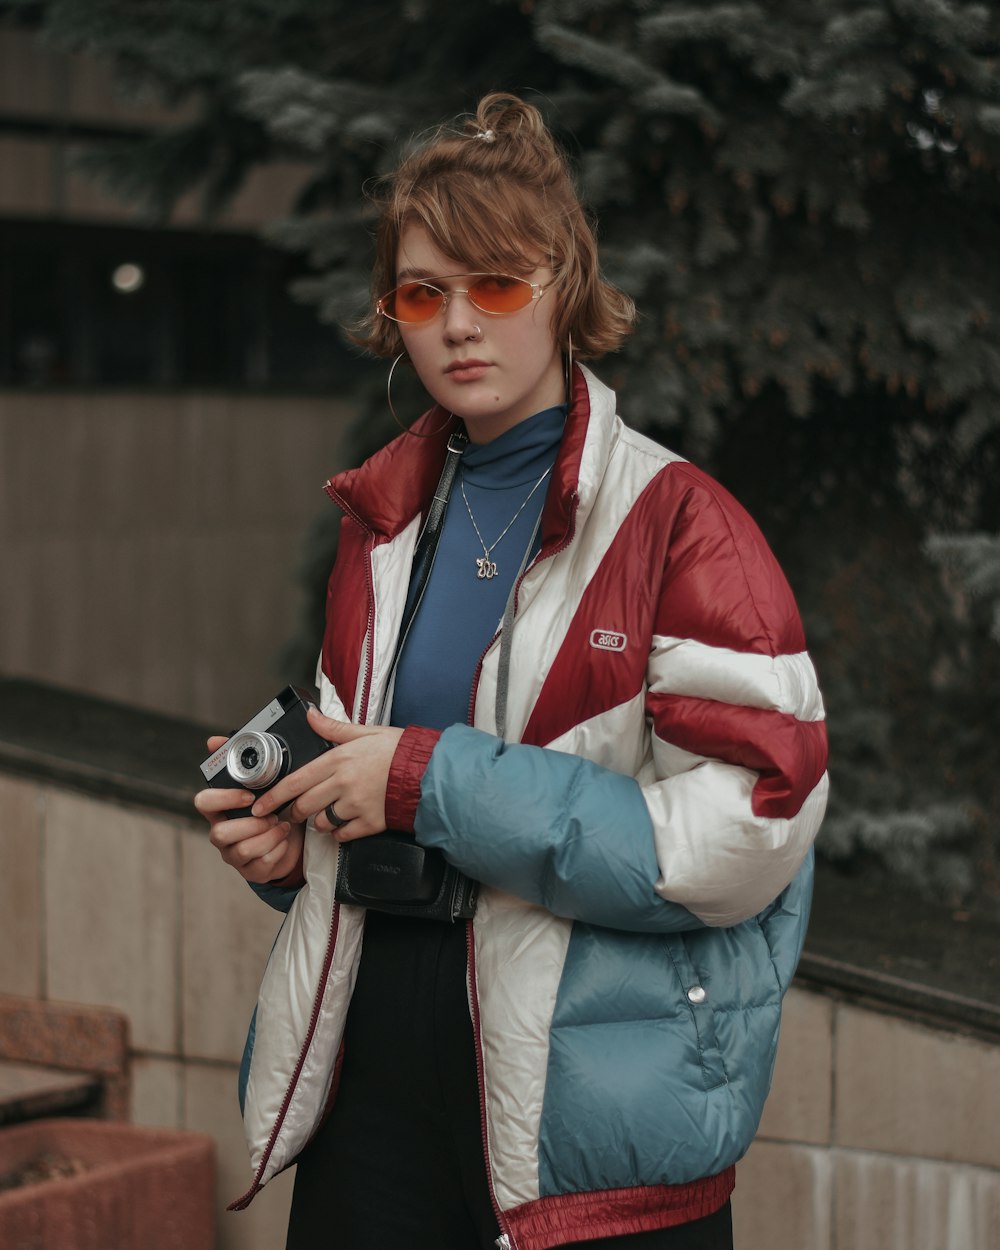 woman in blue jacket holding black camera